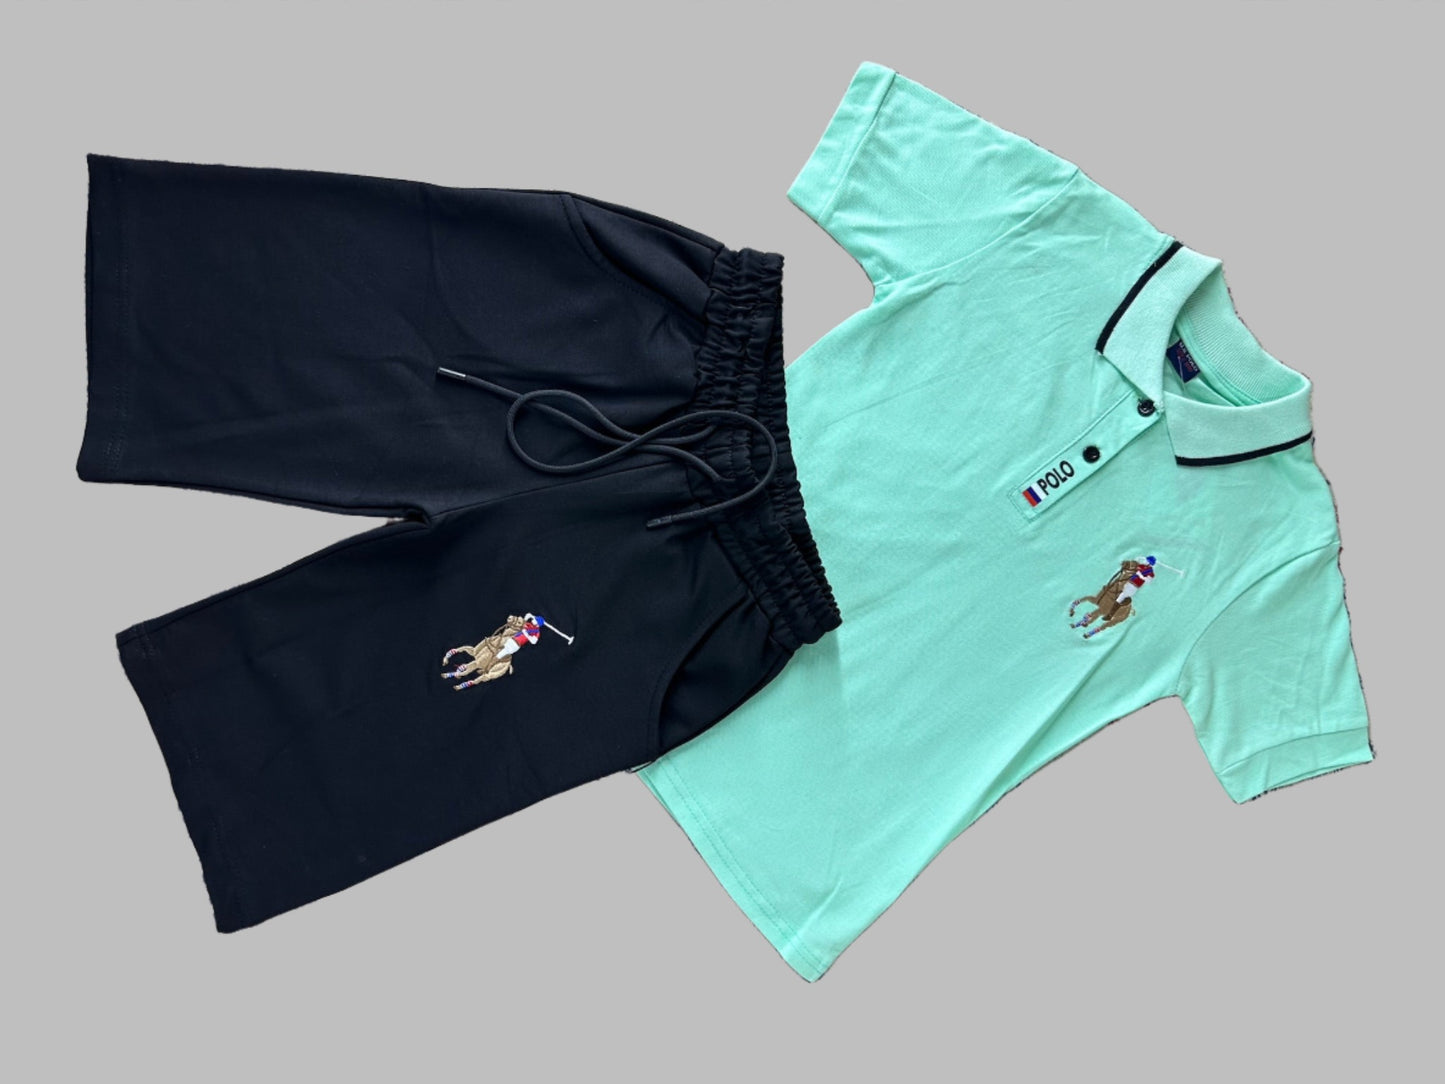 Children's sports set with stylish colors and polo logo